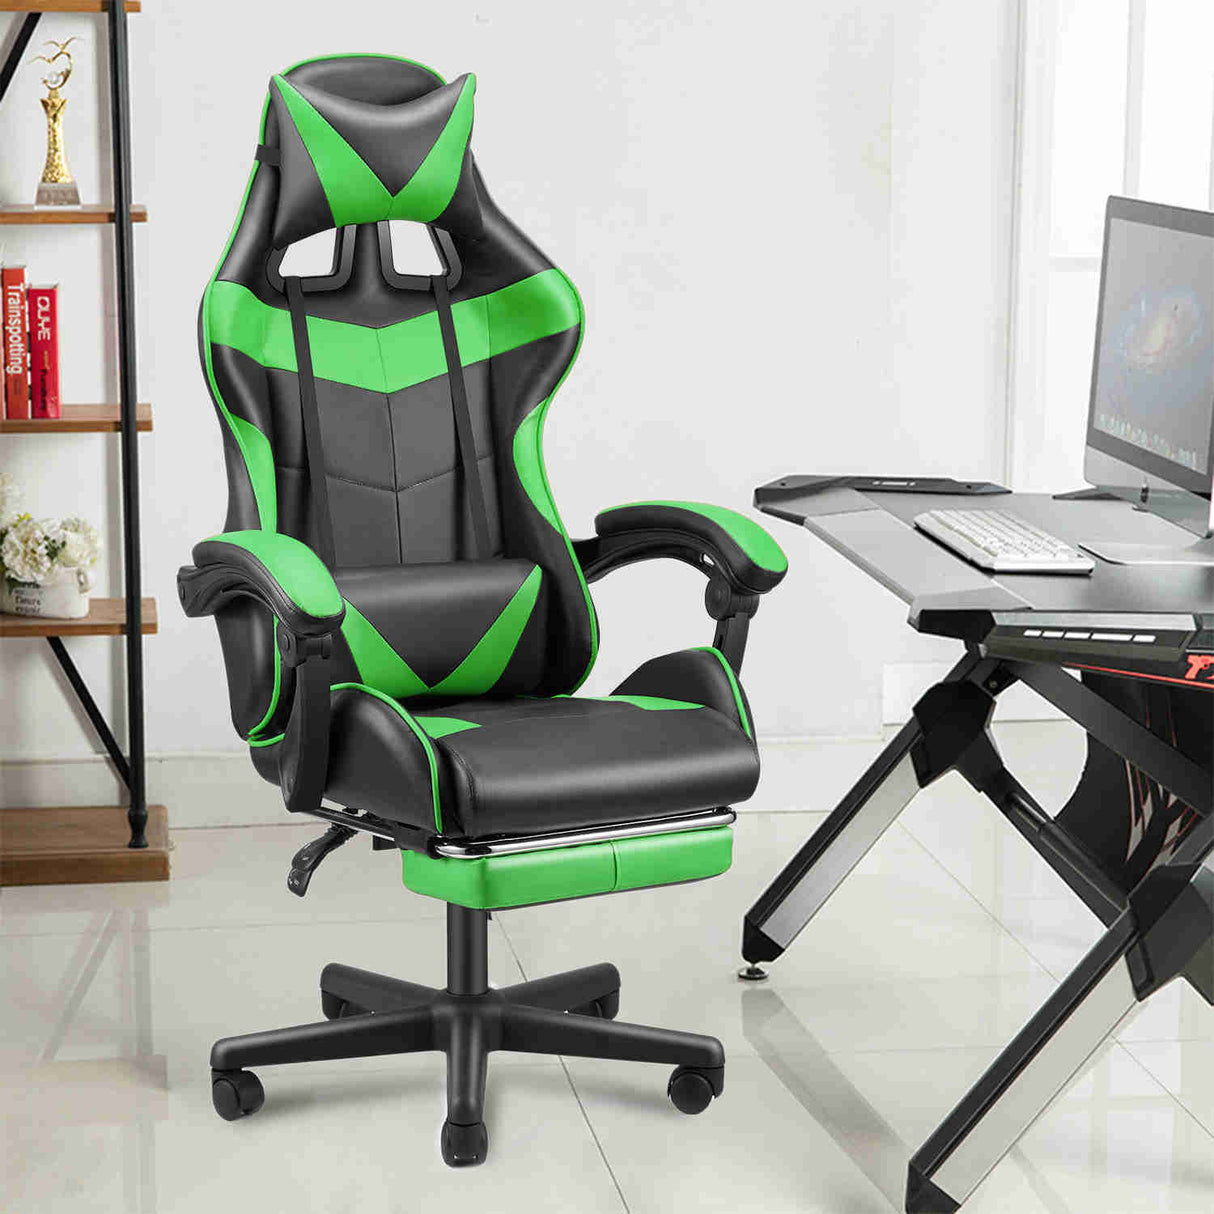 Black Bull Gaming Chair with Foot rest - Green - Level UpBlack BullGaming Chair4044951074135